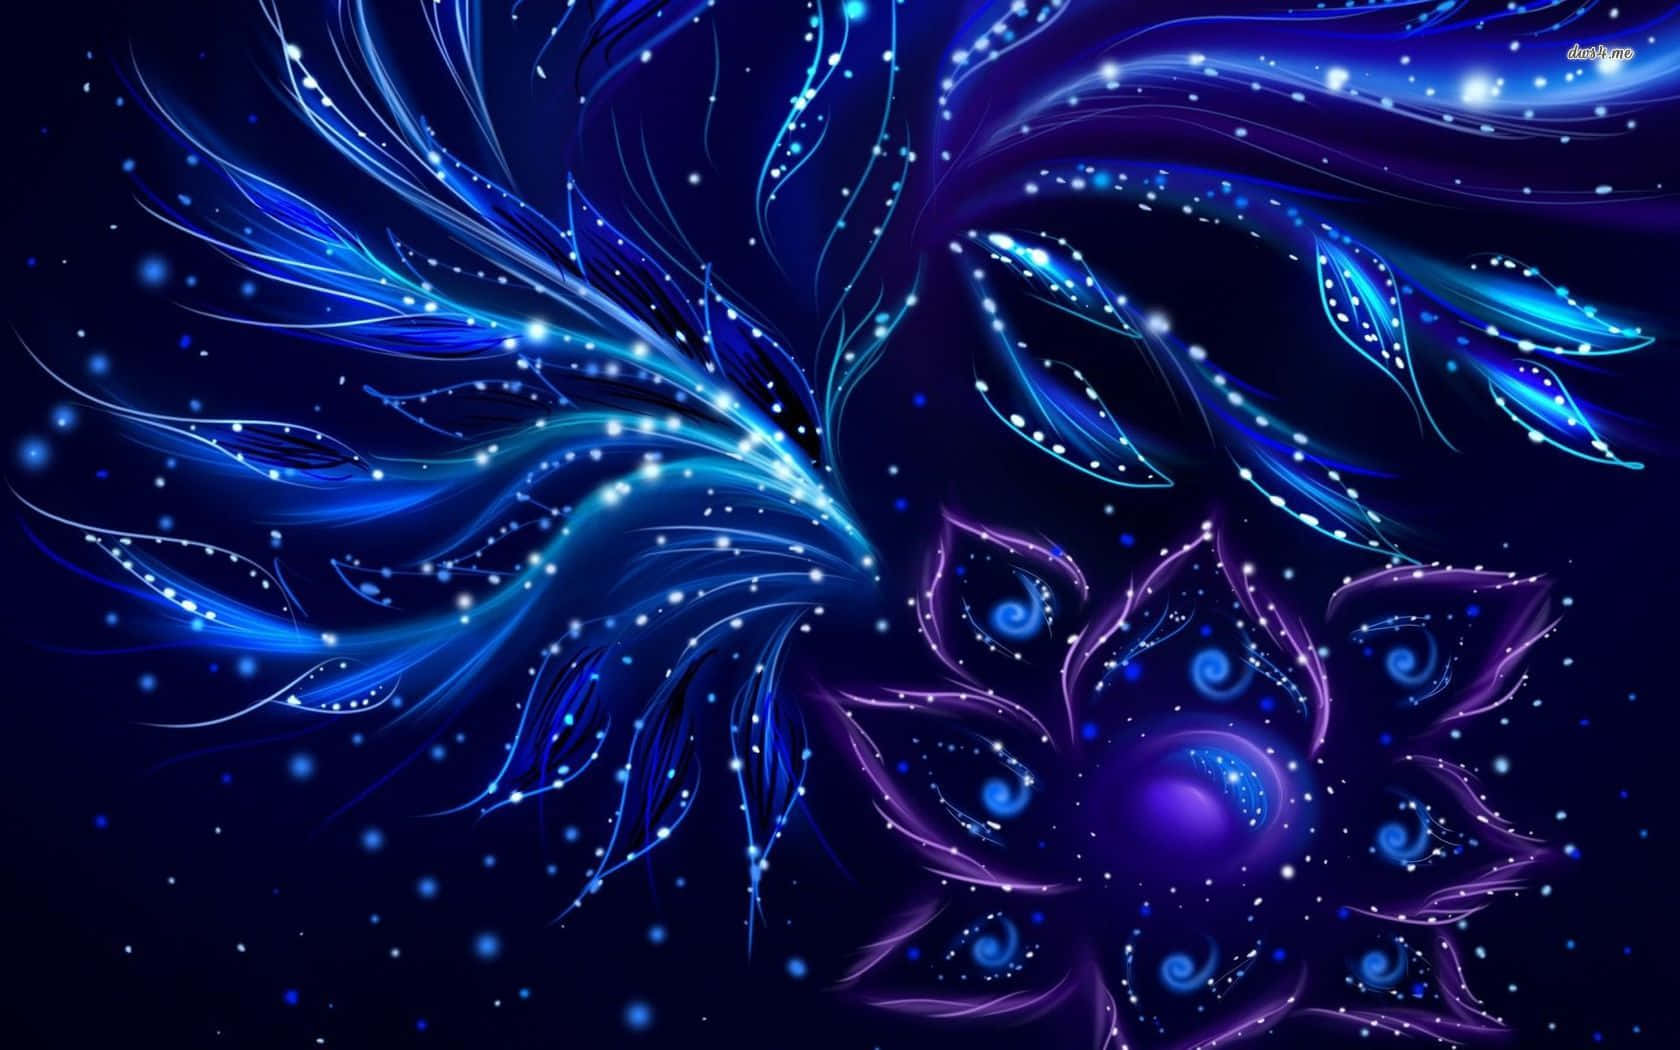 A Blue Flower With Stars And Blue Feathers